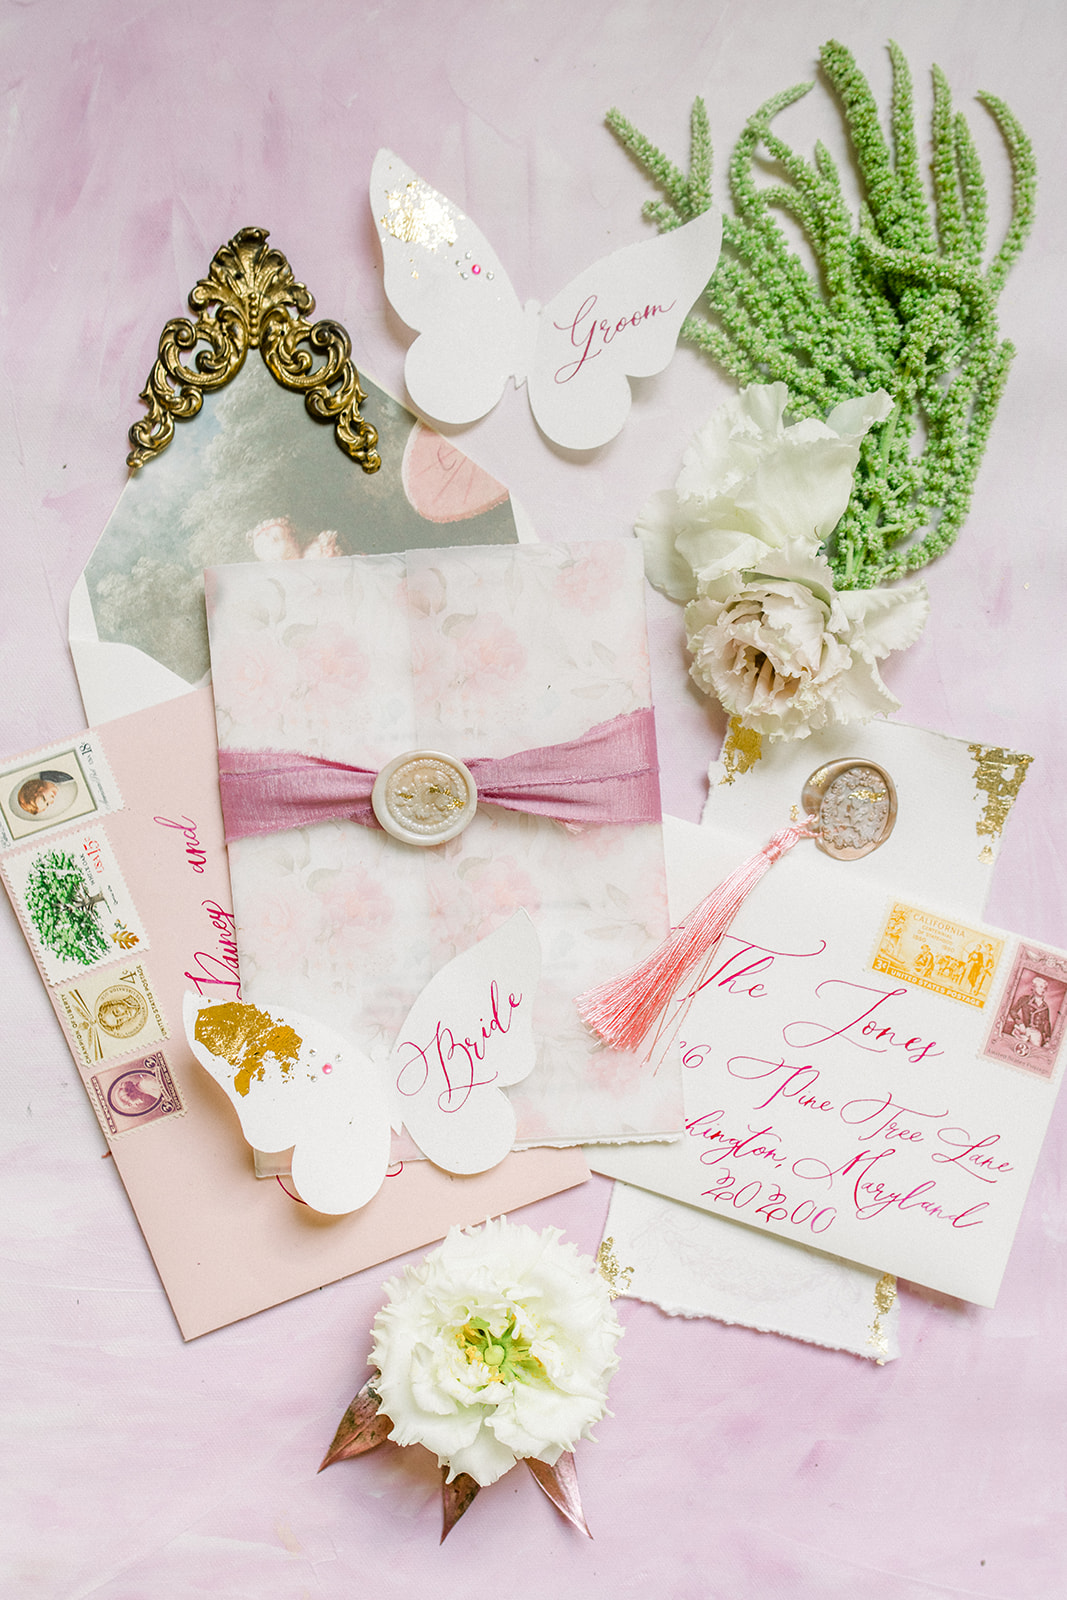 Elegant wedding invitation suite on blush fabric with gold vintage details and florals, by Elephant Limbo.